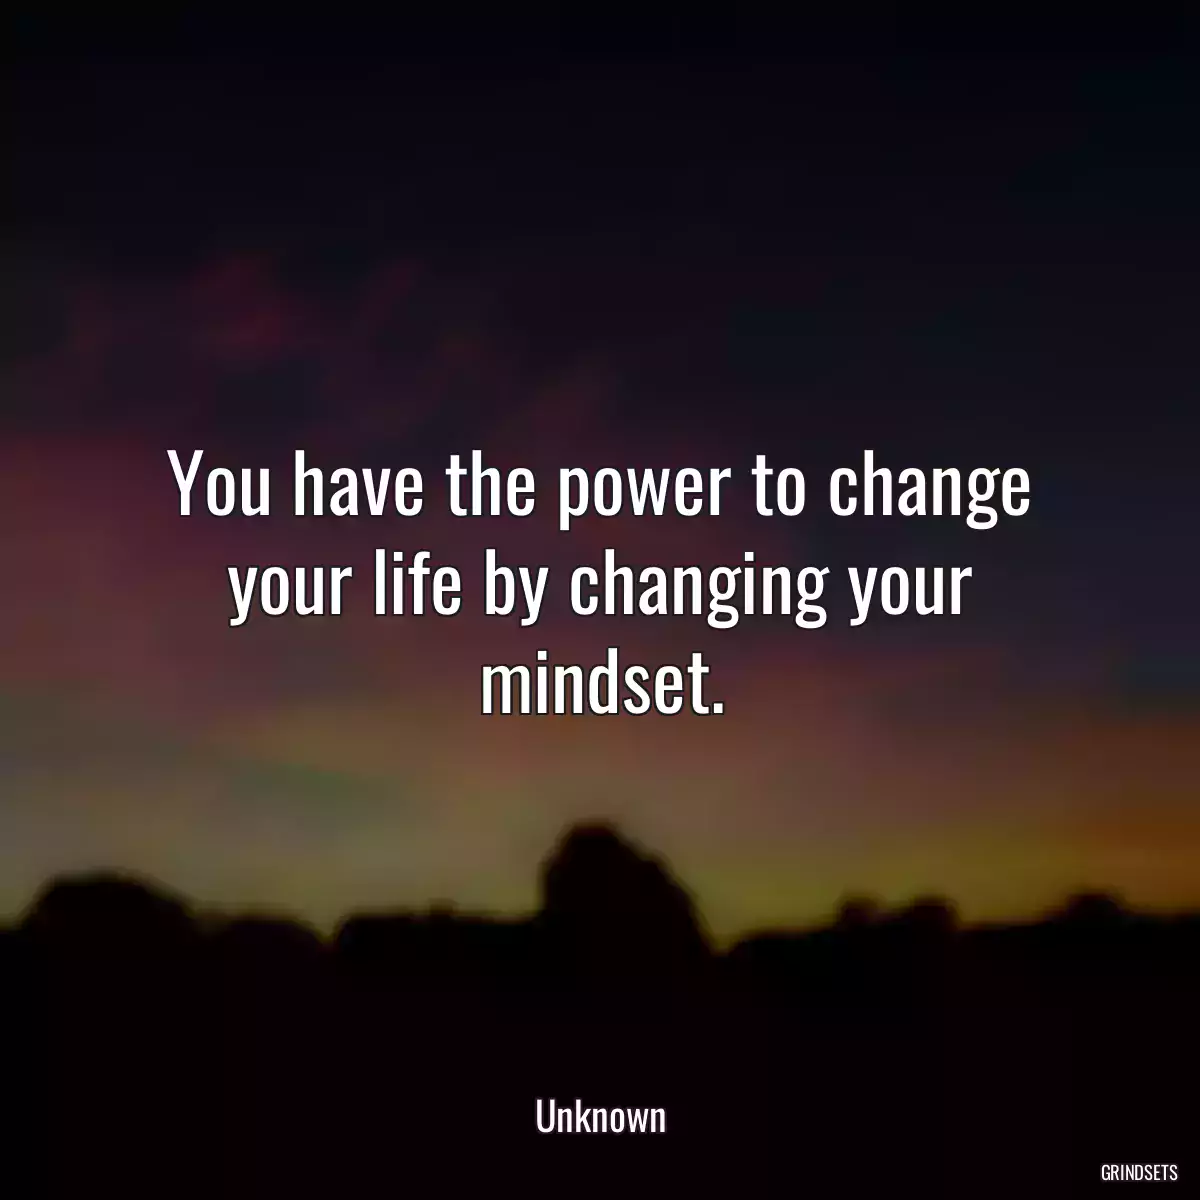 You have the power to change your life by changing your mindset.